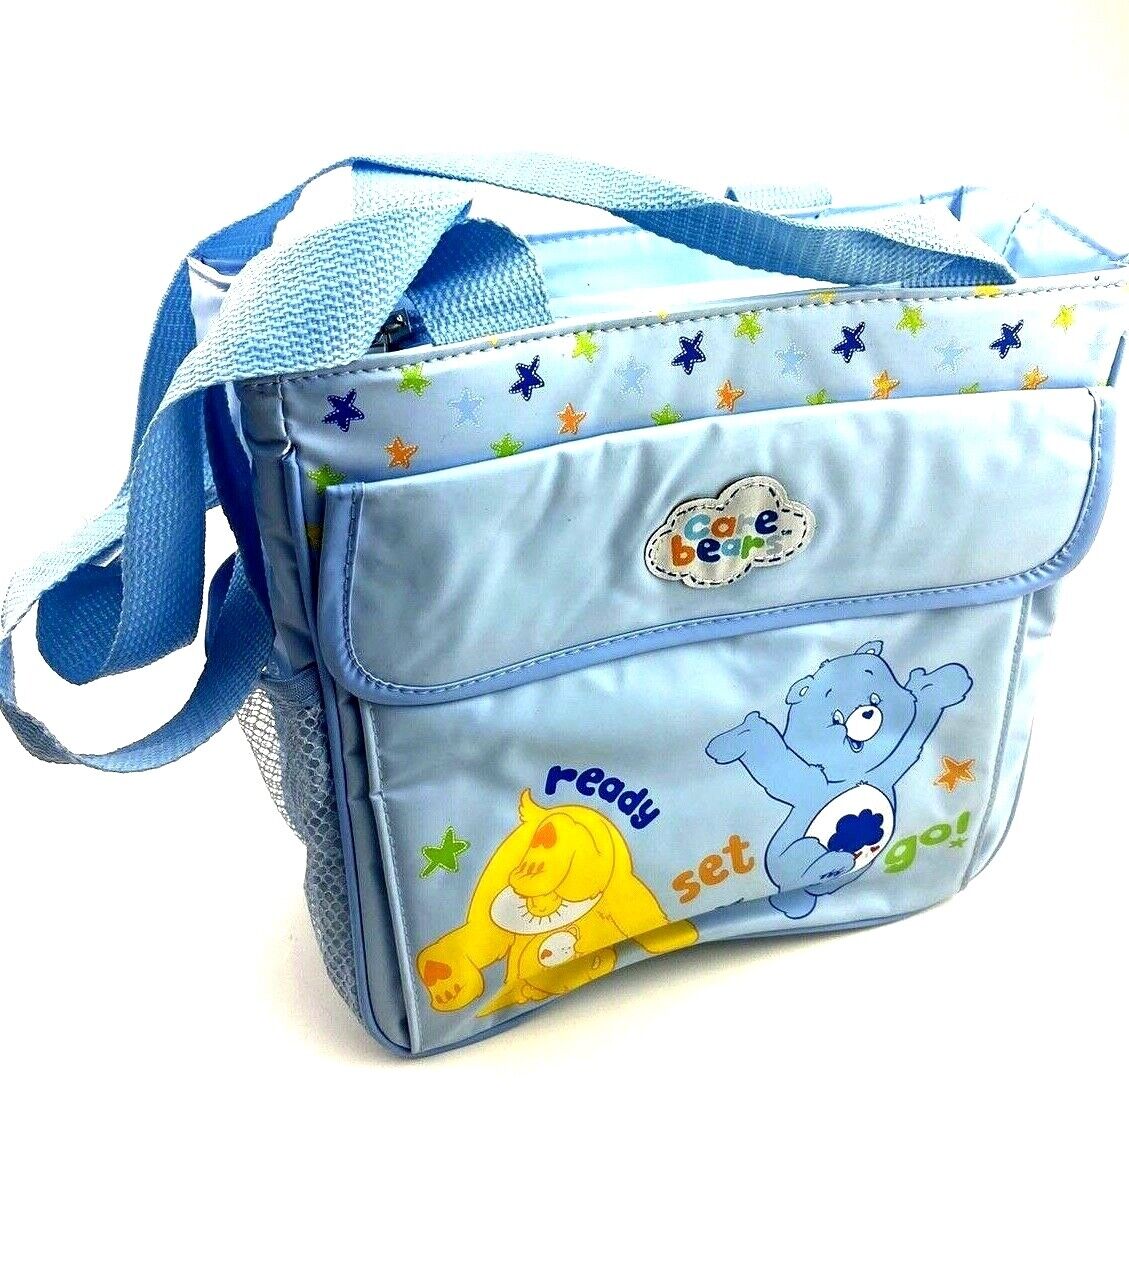 Care Bears Diaper Bag infant Baby Collectible Ranking TOP7 Boys 2006 Baseball Direct stock discount